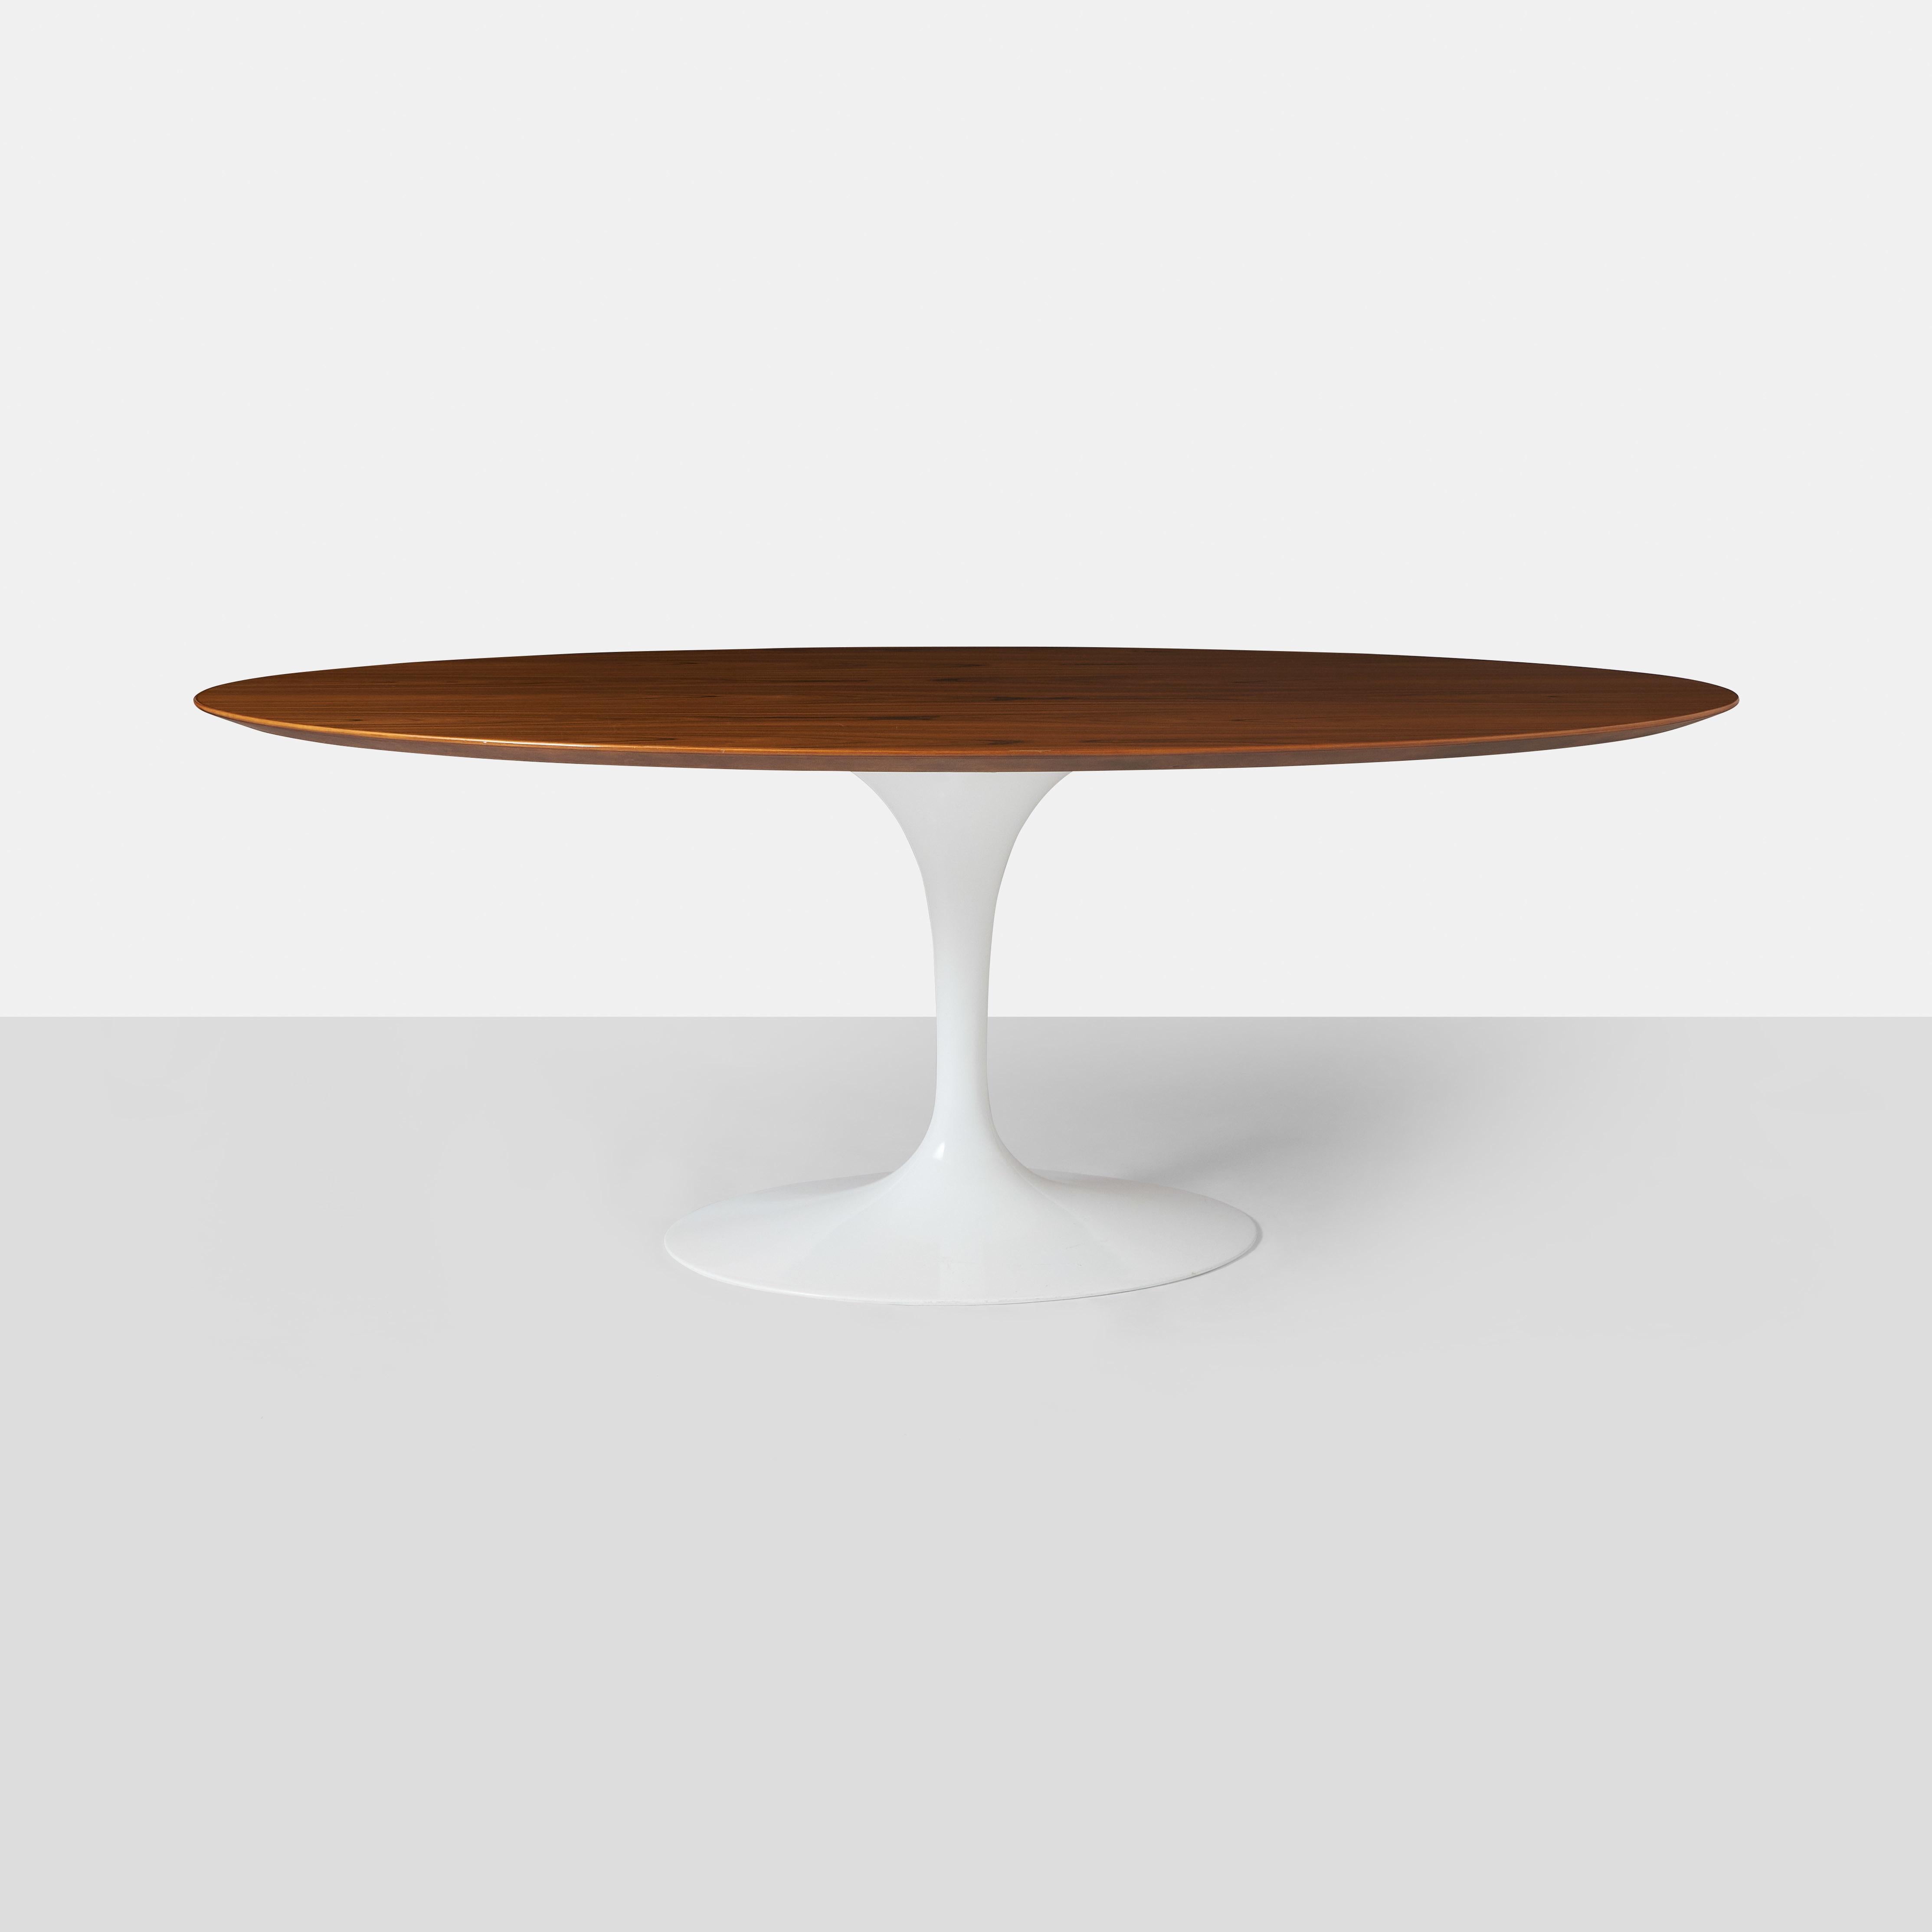 An oval walnut dining table from 2009 with a beautifully grained knife edged walnut top, a white cast aluminum pedestal base. 
Manufacturers label and metal Saarinen signature plaque on the underside.